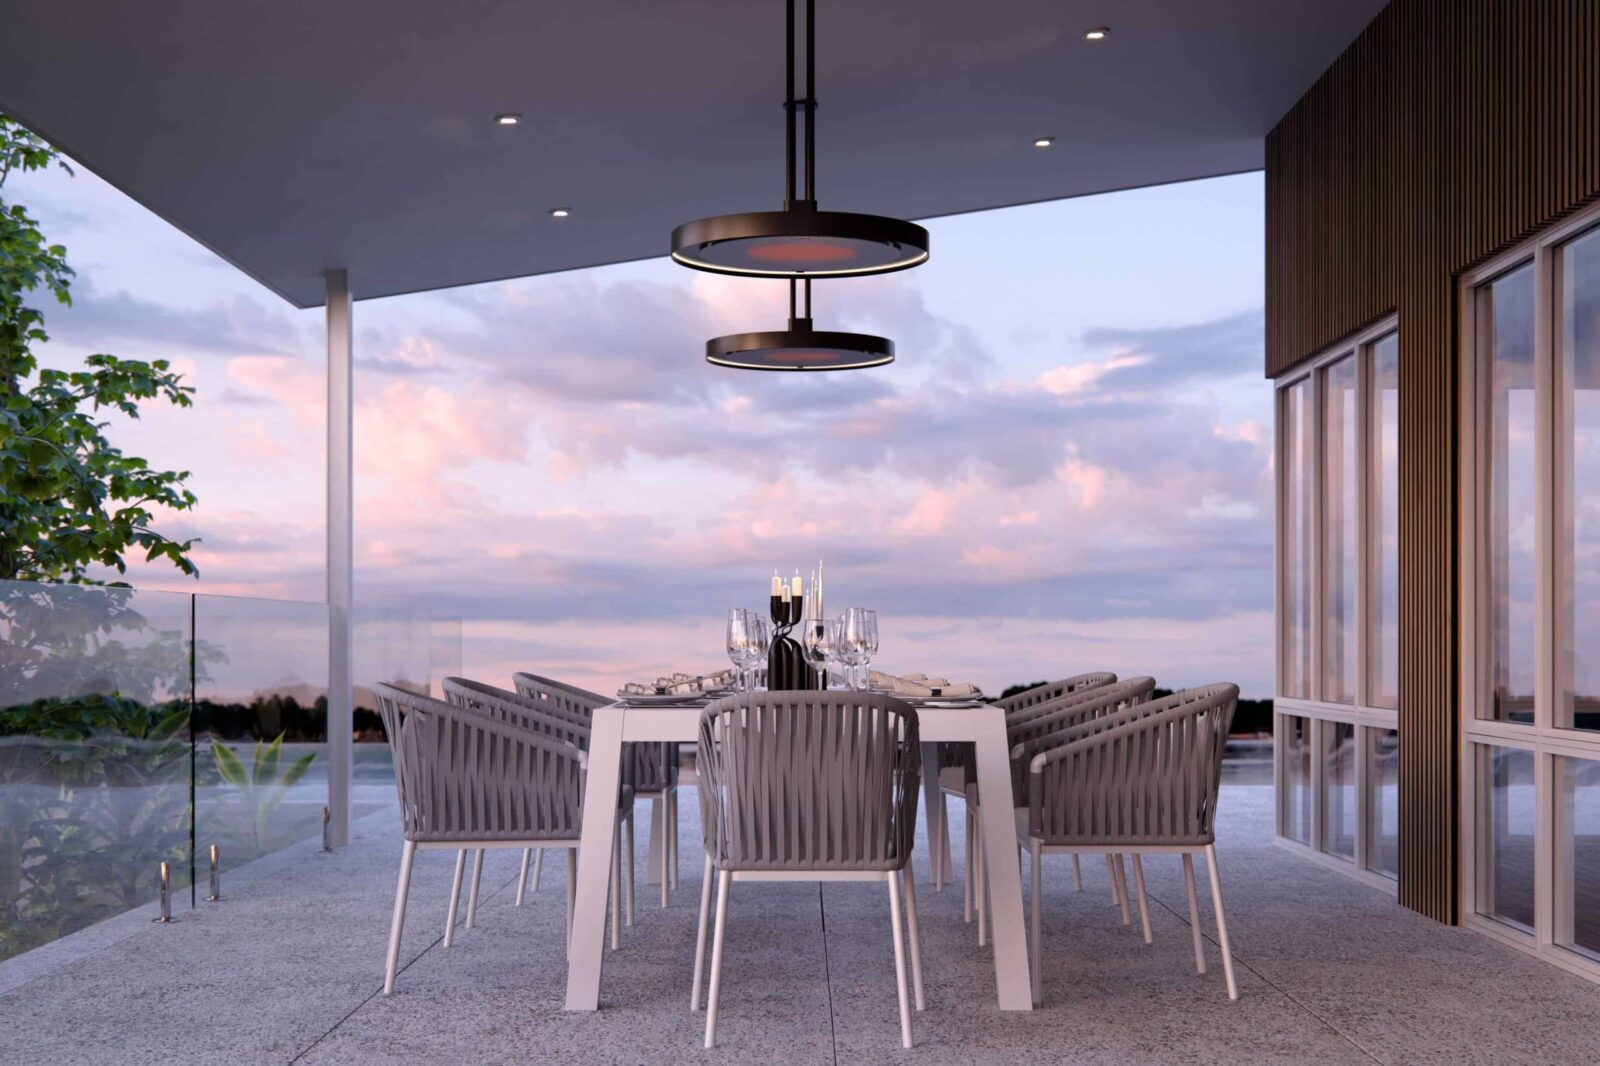 Electric Outdoor Heater above Table